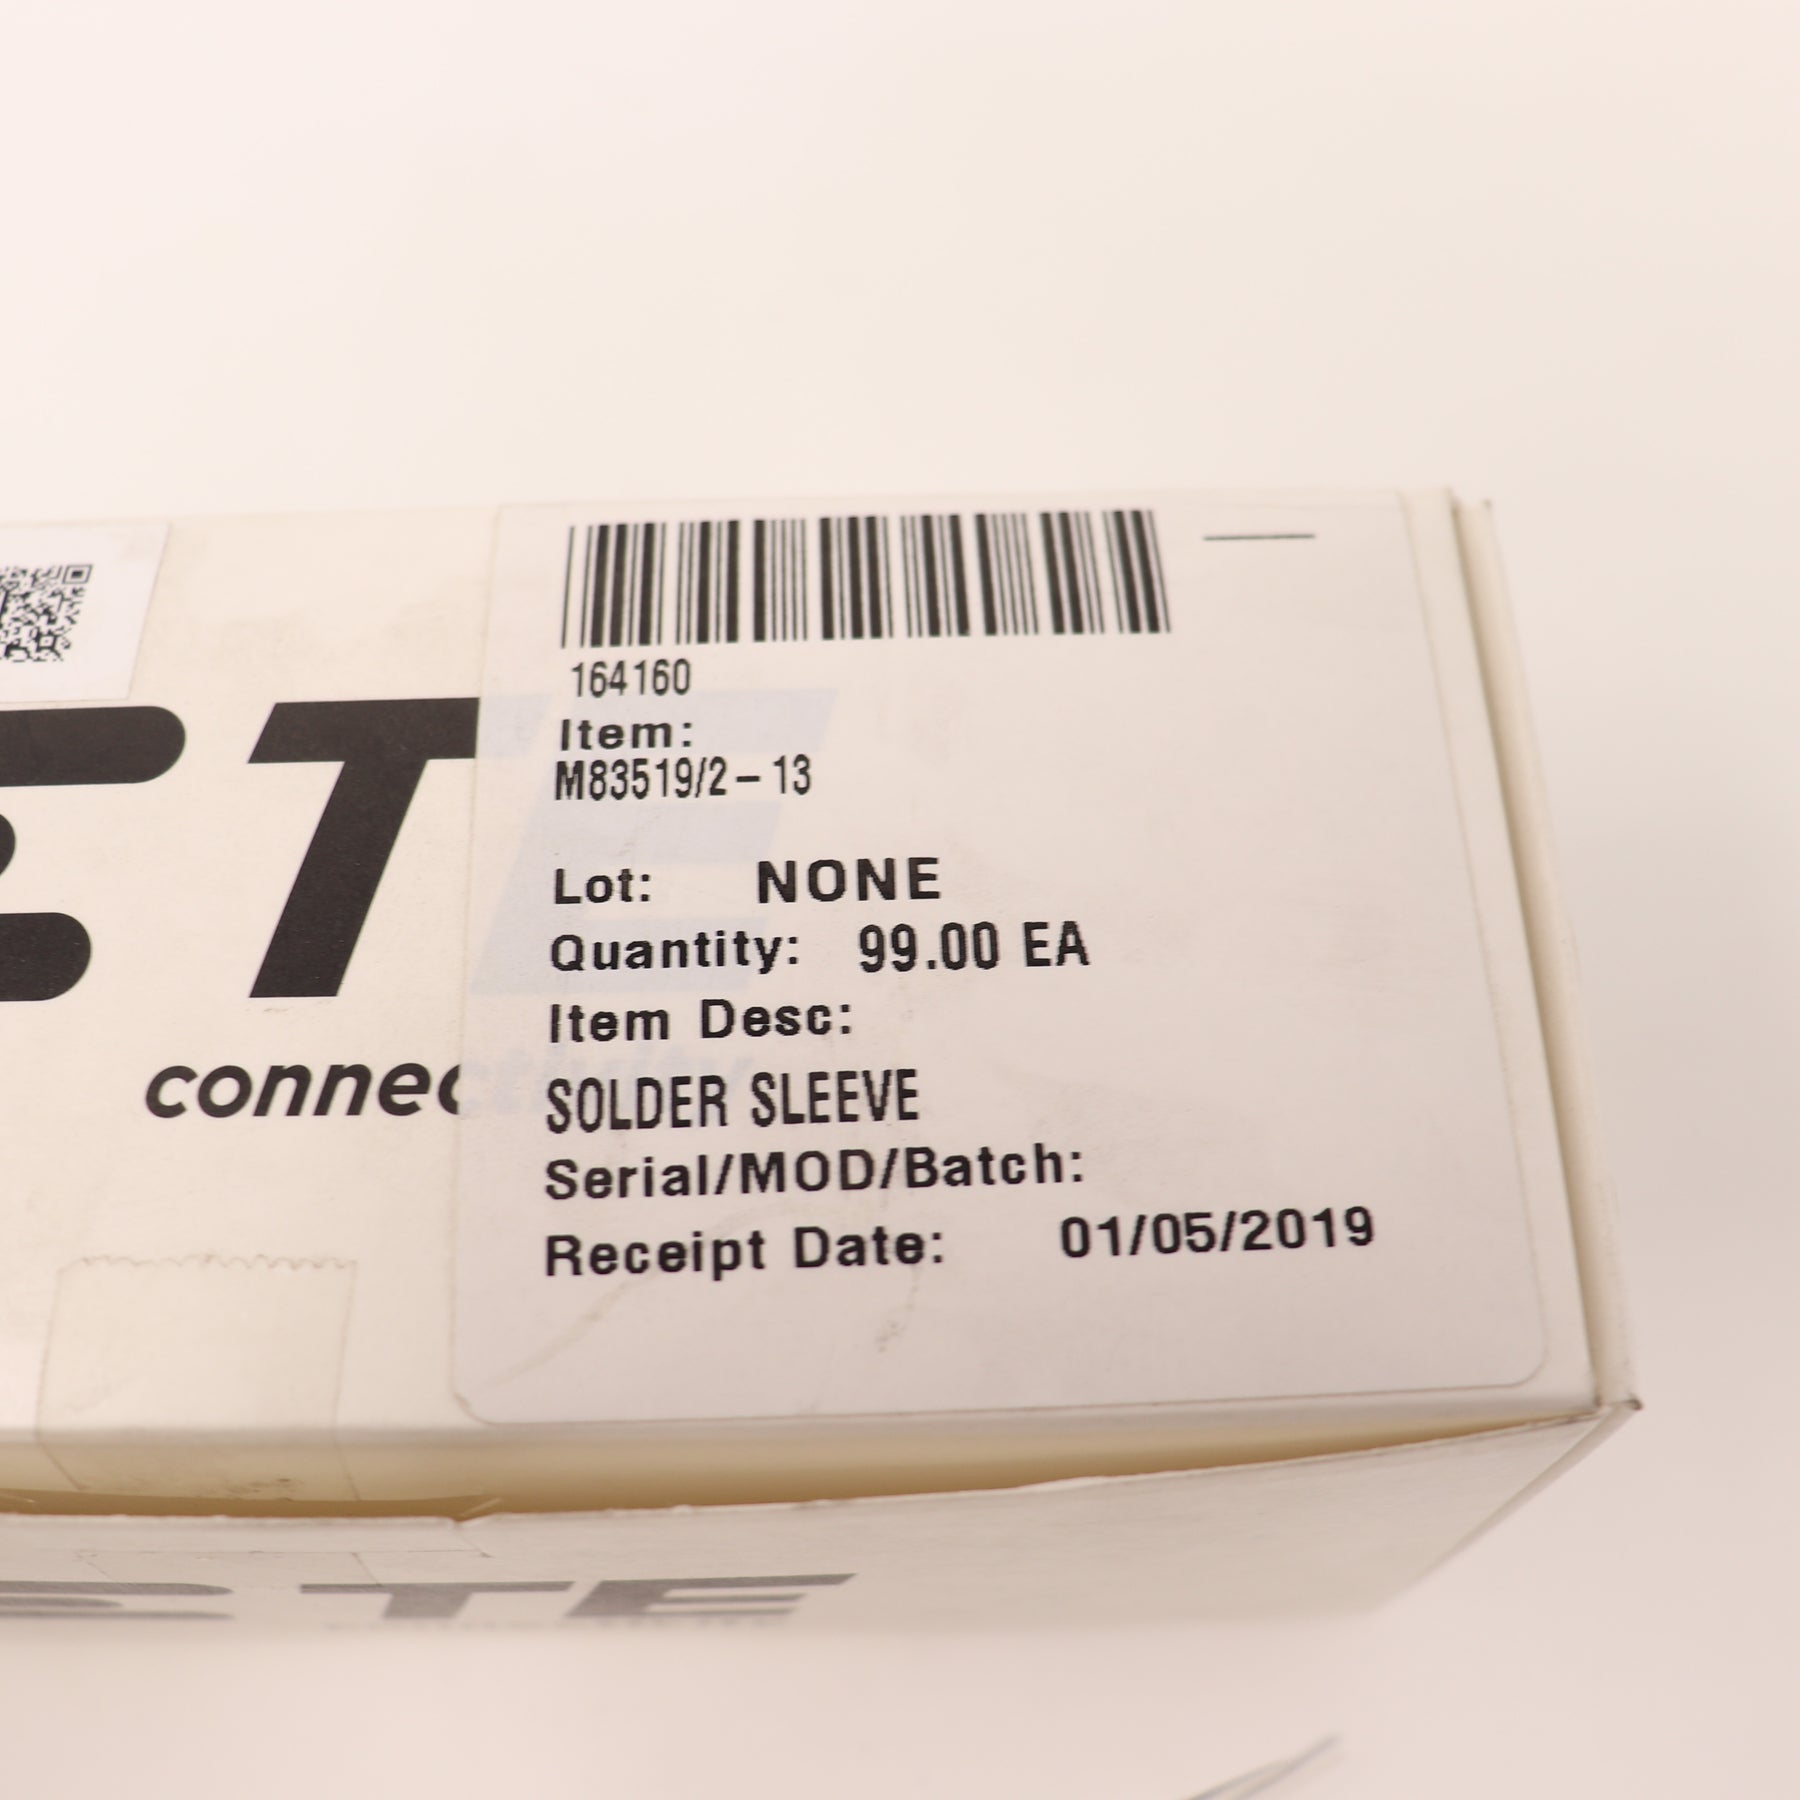 (49) PackTE Connectivity Solder Sleeve M83519/2-13 S02-13-RCS453